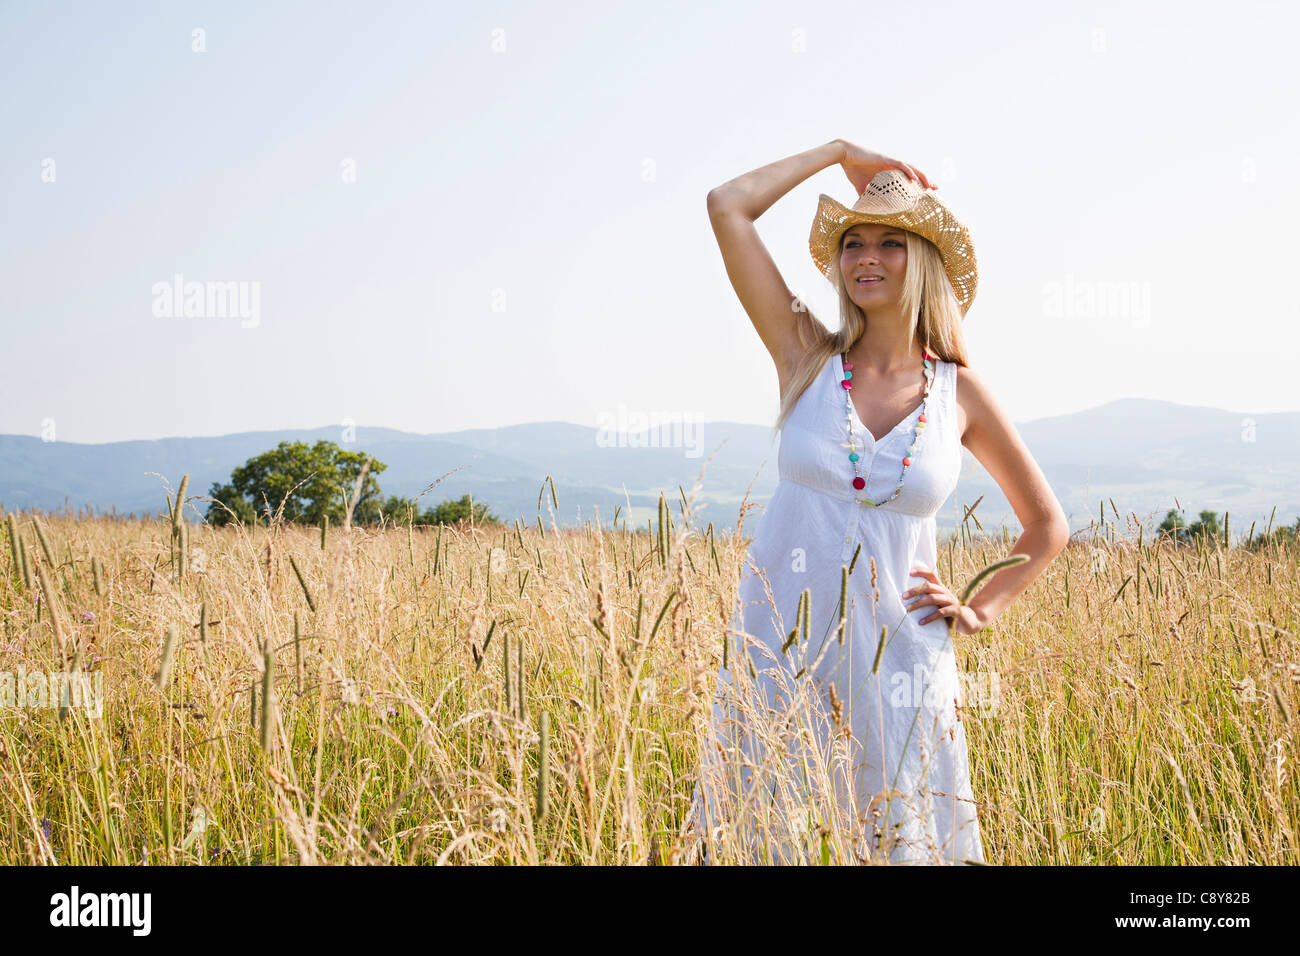 Young woman with hat standing in field Banque D'Images